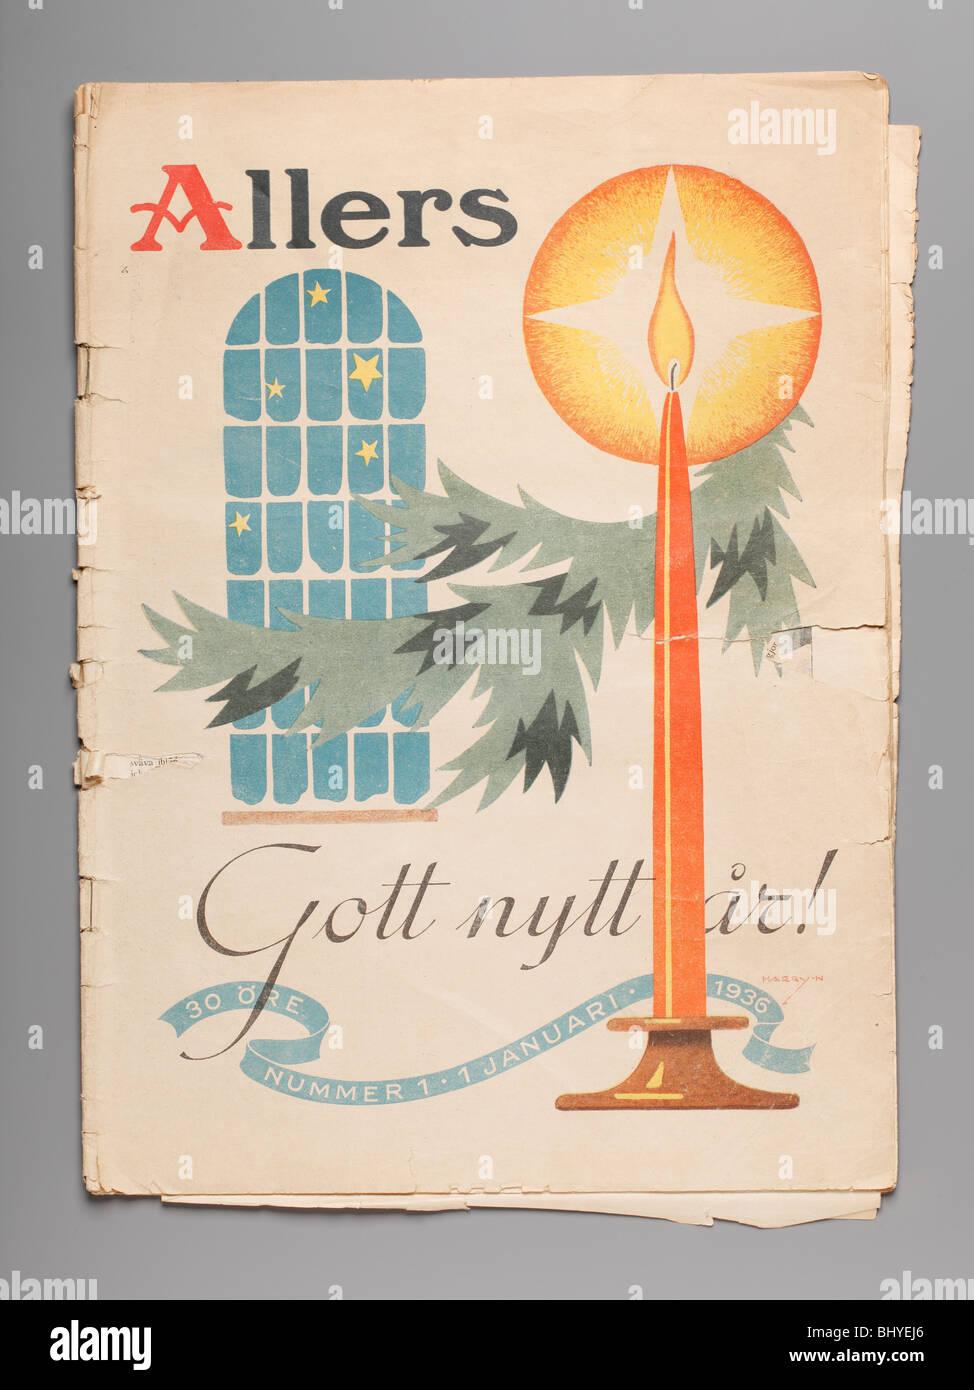 Swedish Allers magazine from 1930s. Stock Photo